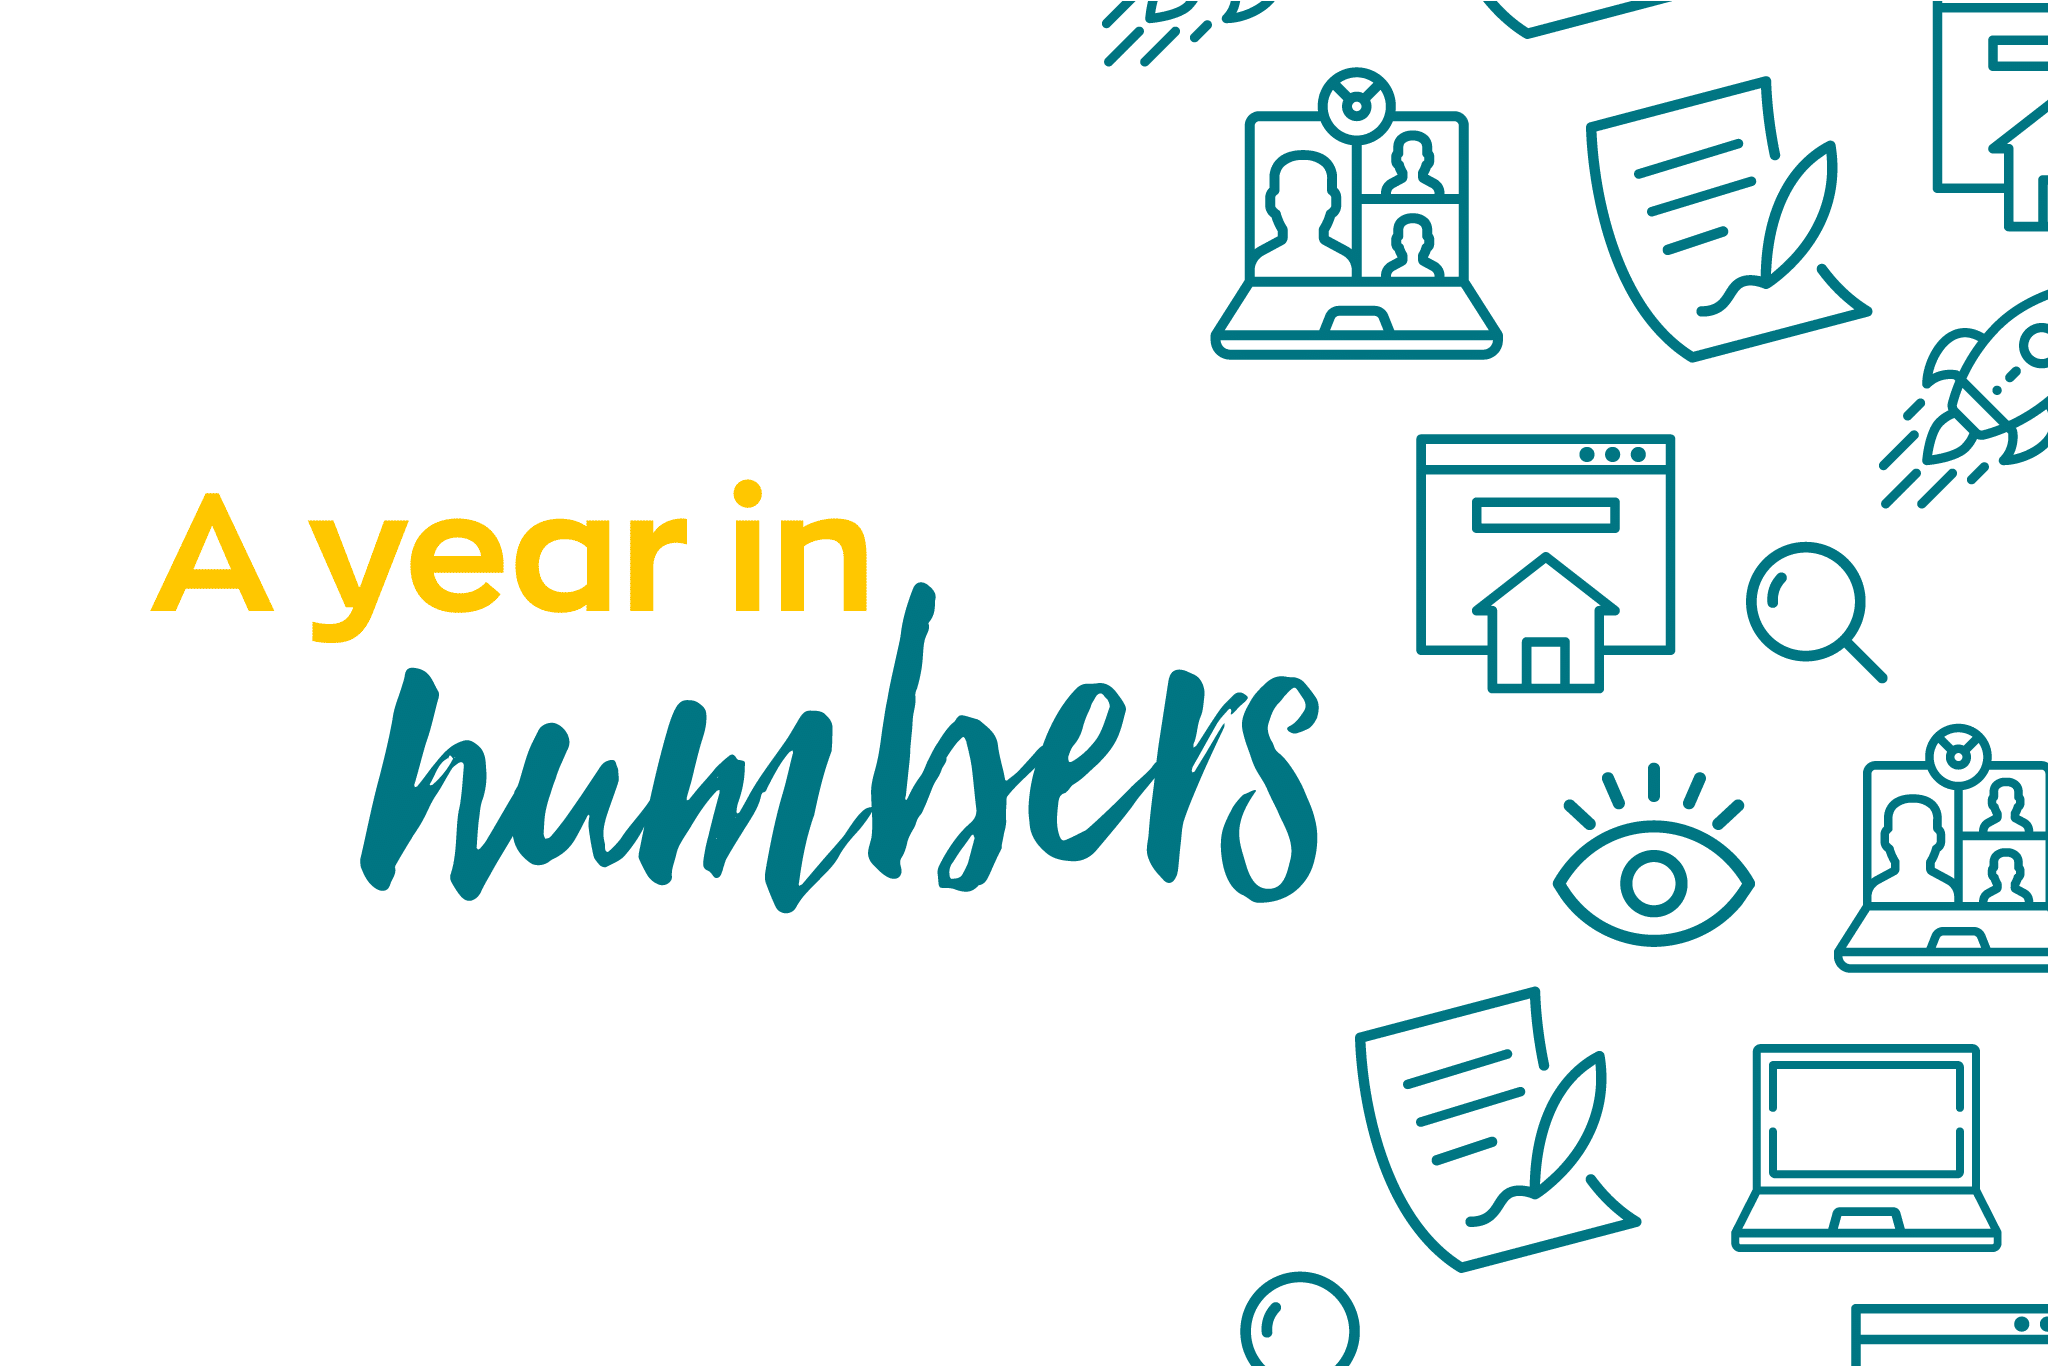 A year in numbers